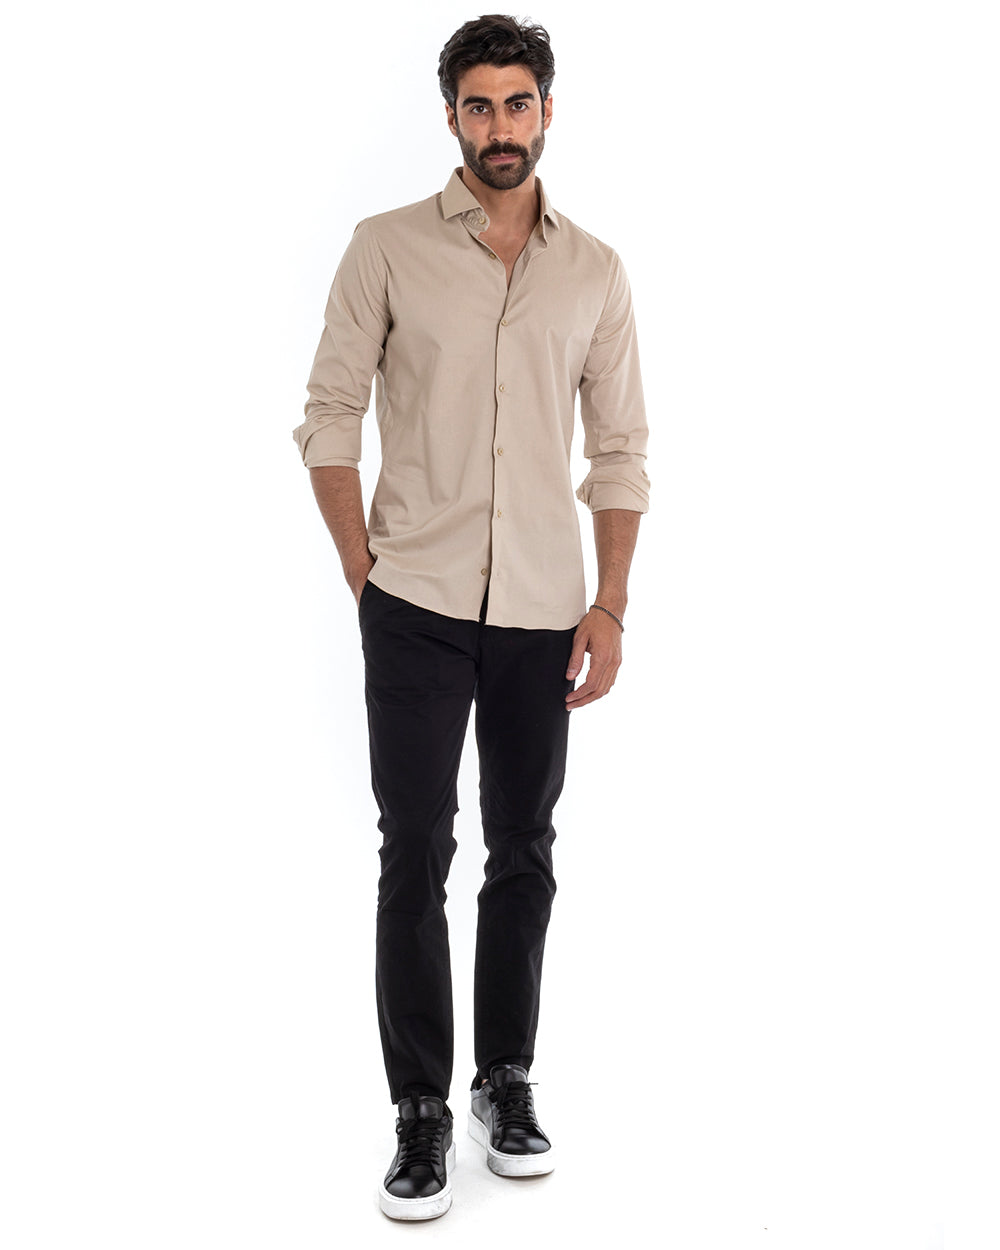 Men's Tailored Shirt With Collar Long Sleeve Basic Soft Cotton Beige Regular Fit GIOSAL-C2394A